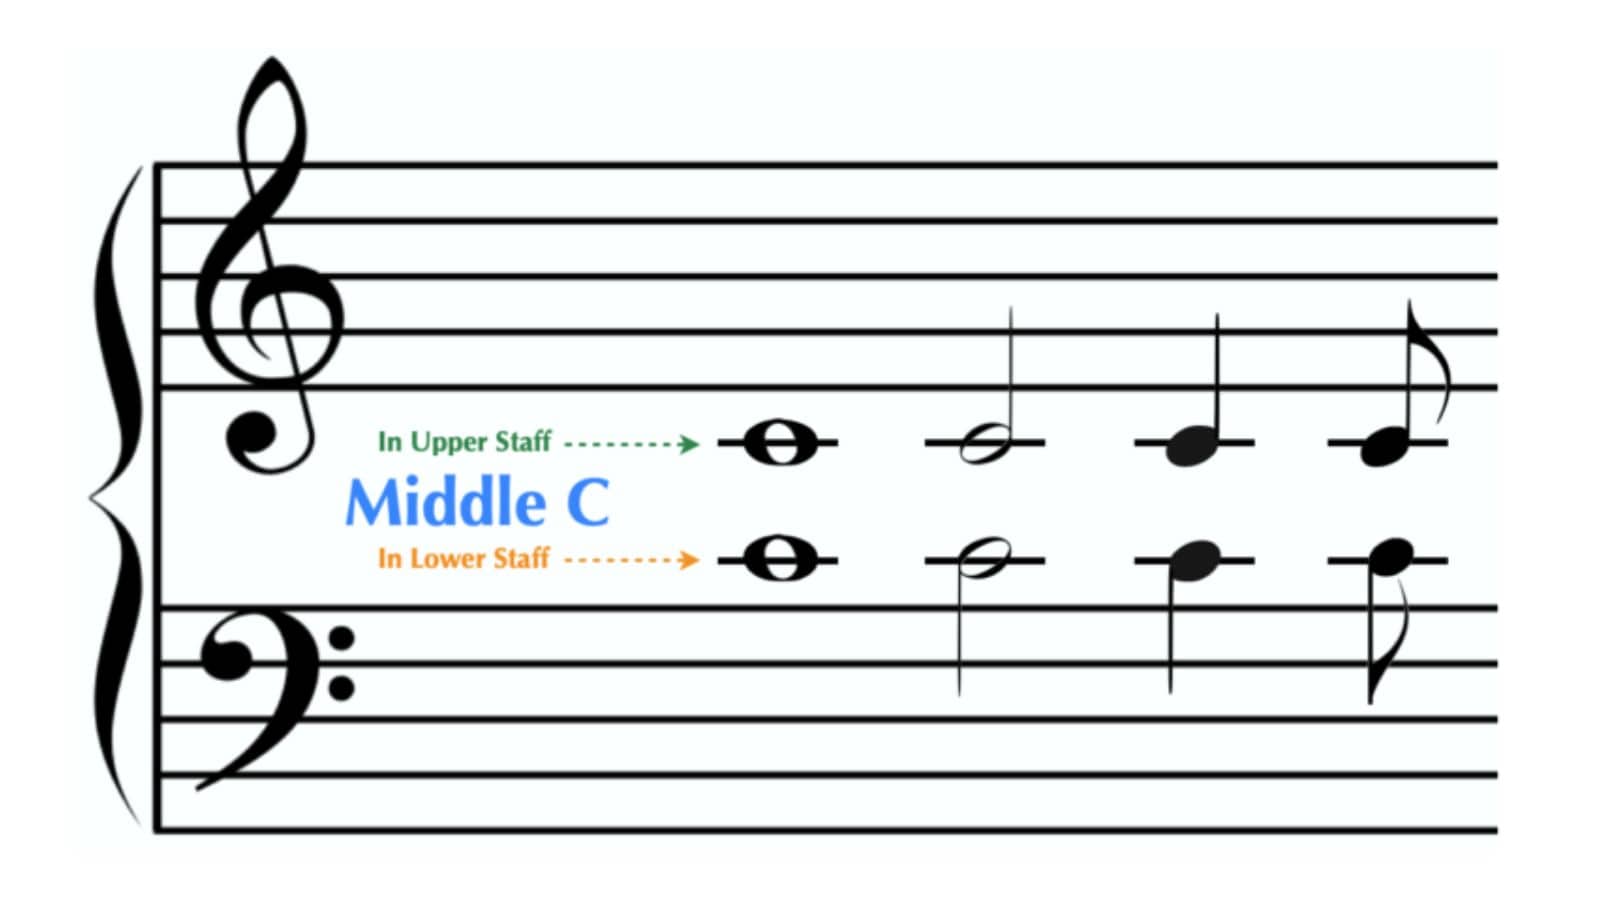 Middle C in the treble and bass clef